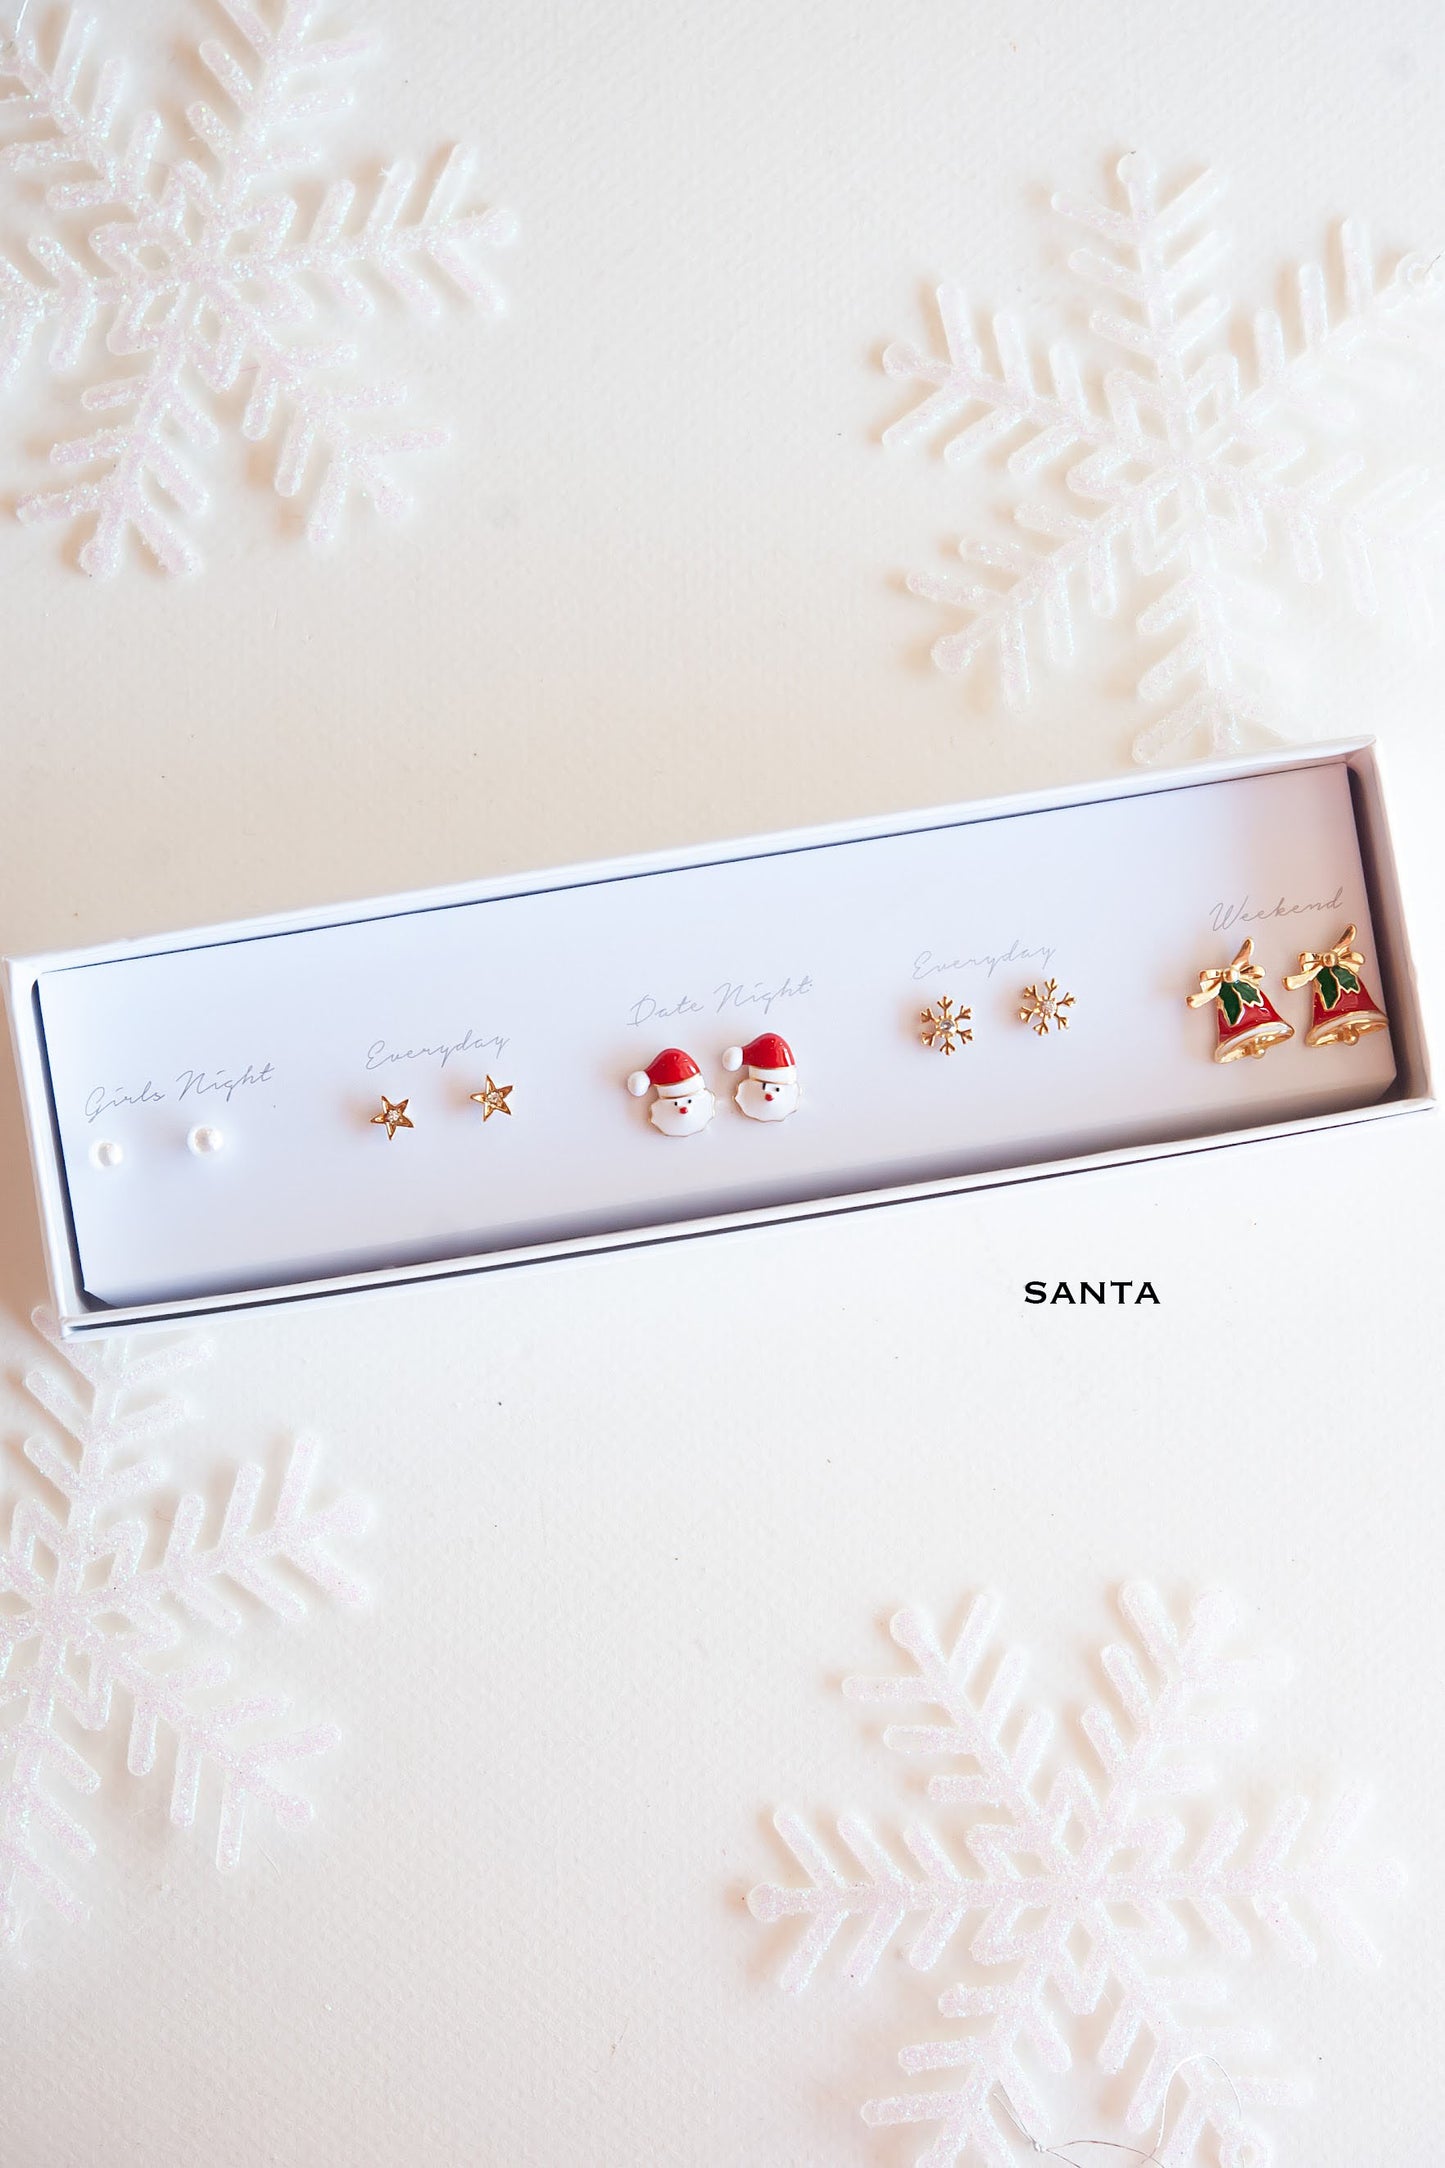 Boxed Christmas Earrings Set | Gift Ready Holiday Stud Sets | Dainty Antler Jewelry | Festive Whimsical Accessories